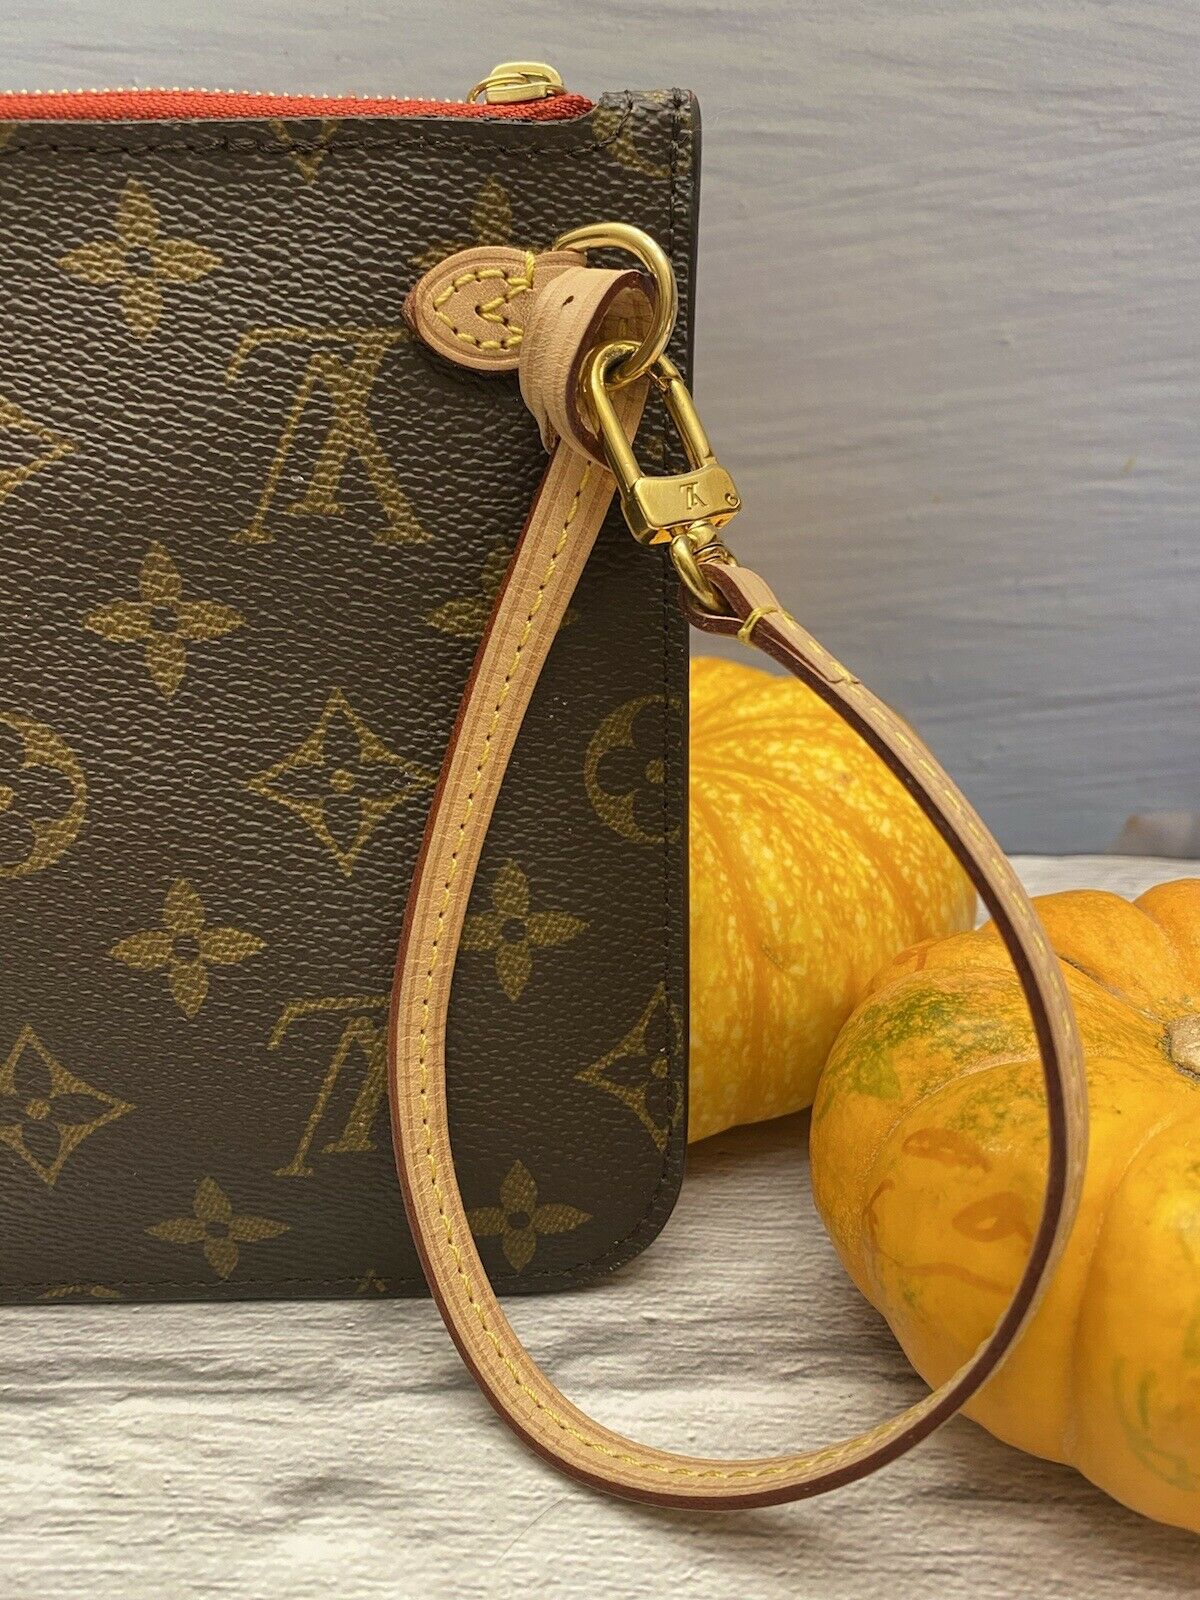 neverfull mm or gm